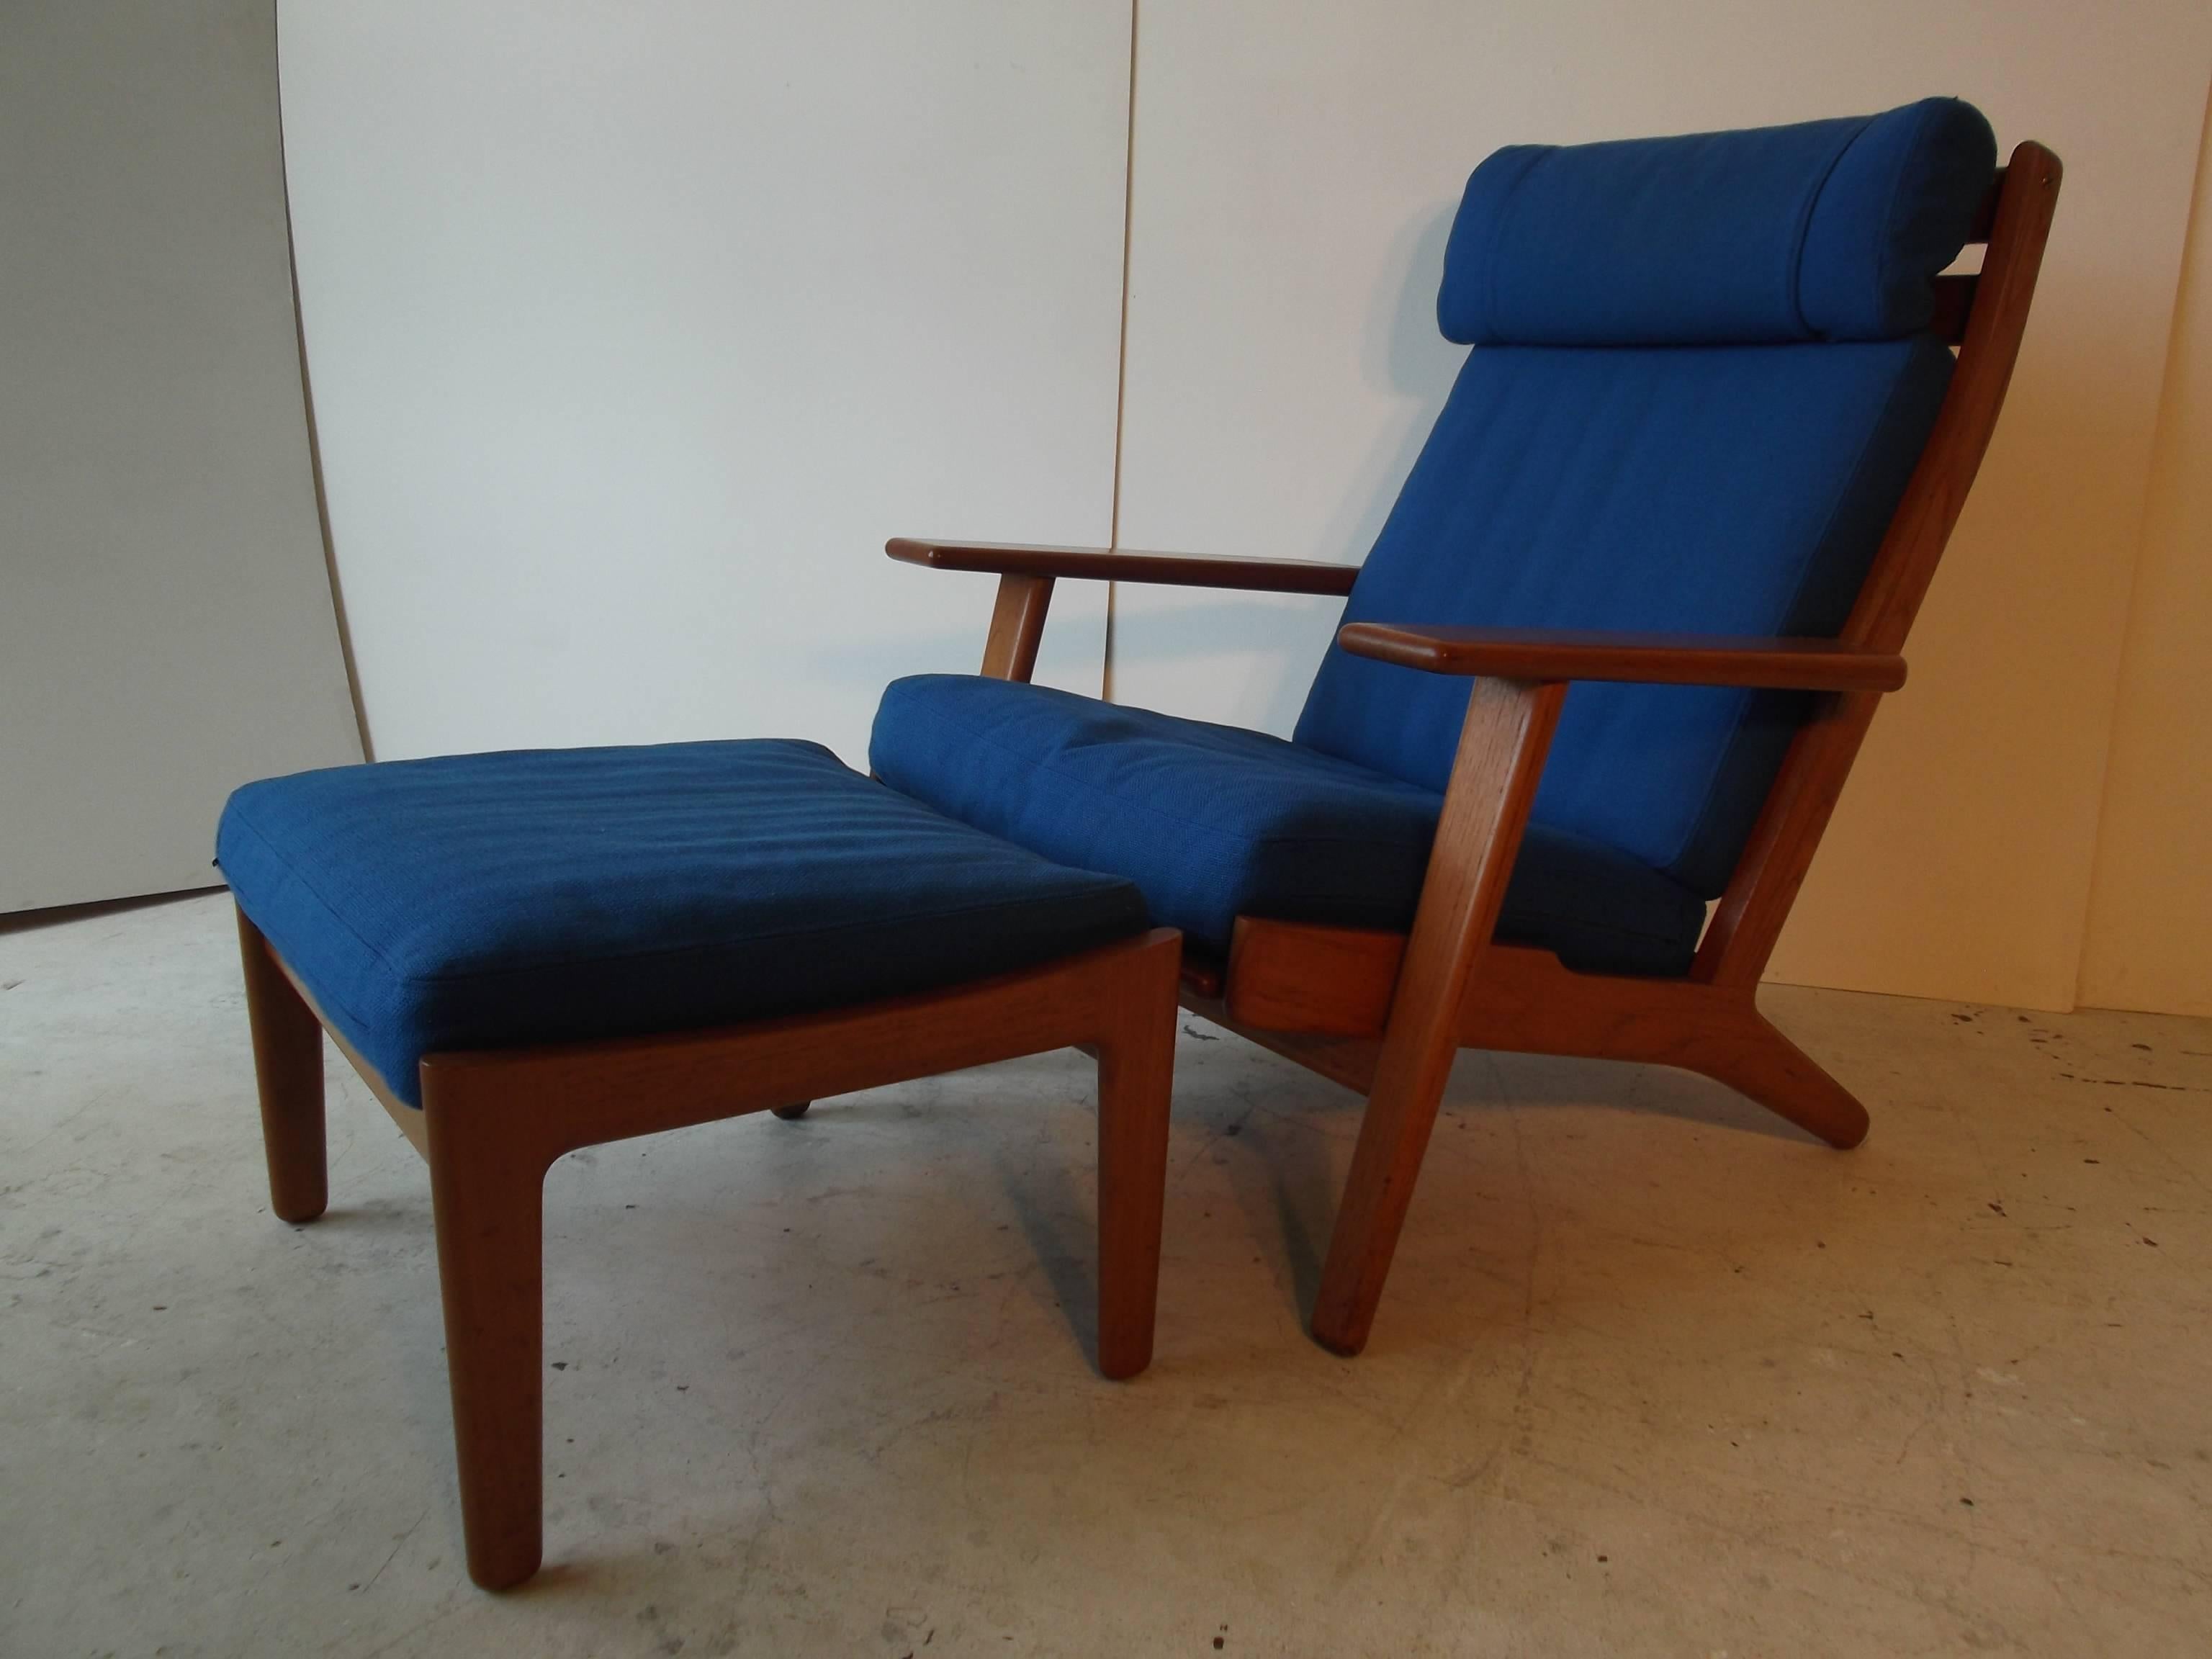 Hans Wegner Teak Lounge Chair with Ottoman for GETAMA In Good Condition For Sale In Tulsa, OK